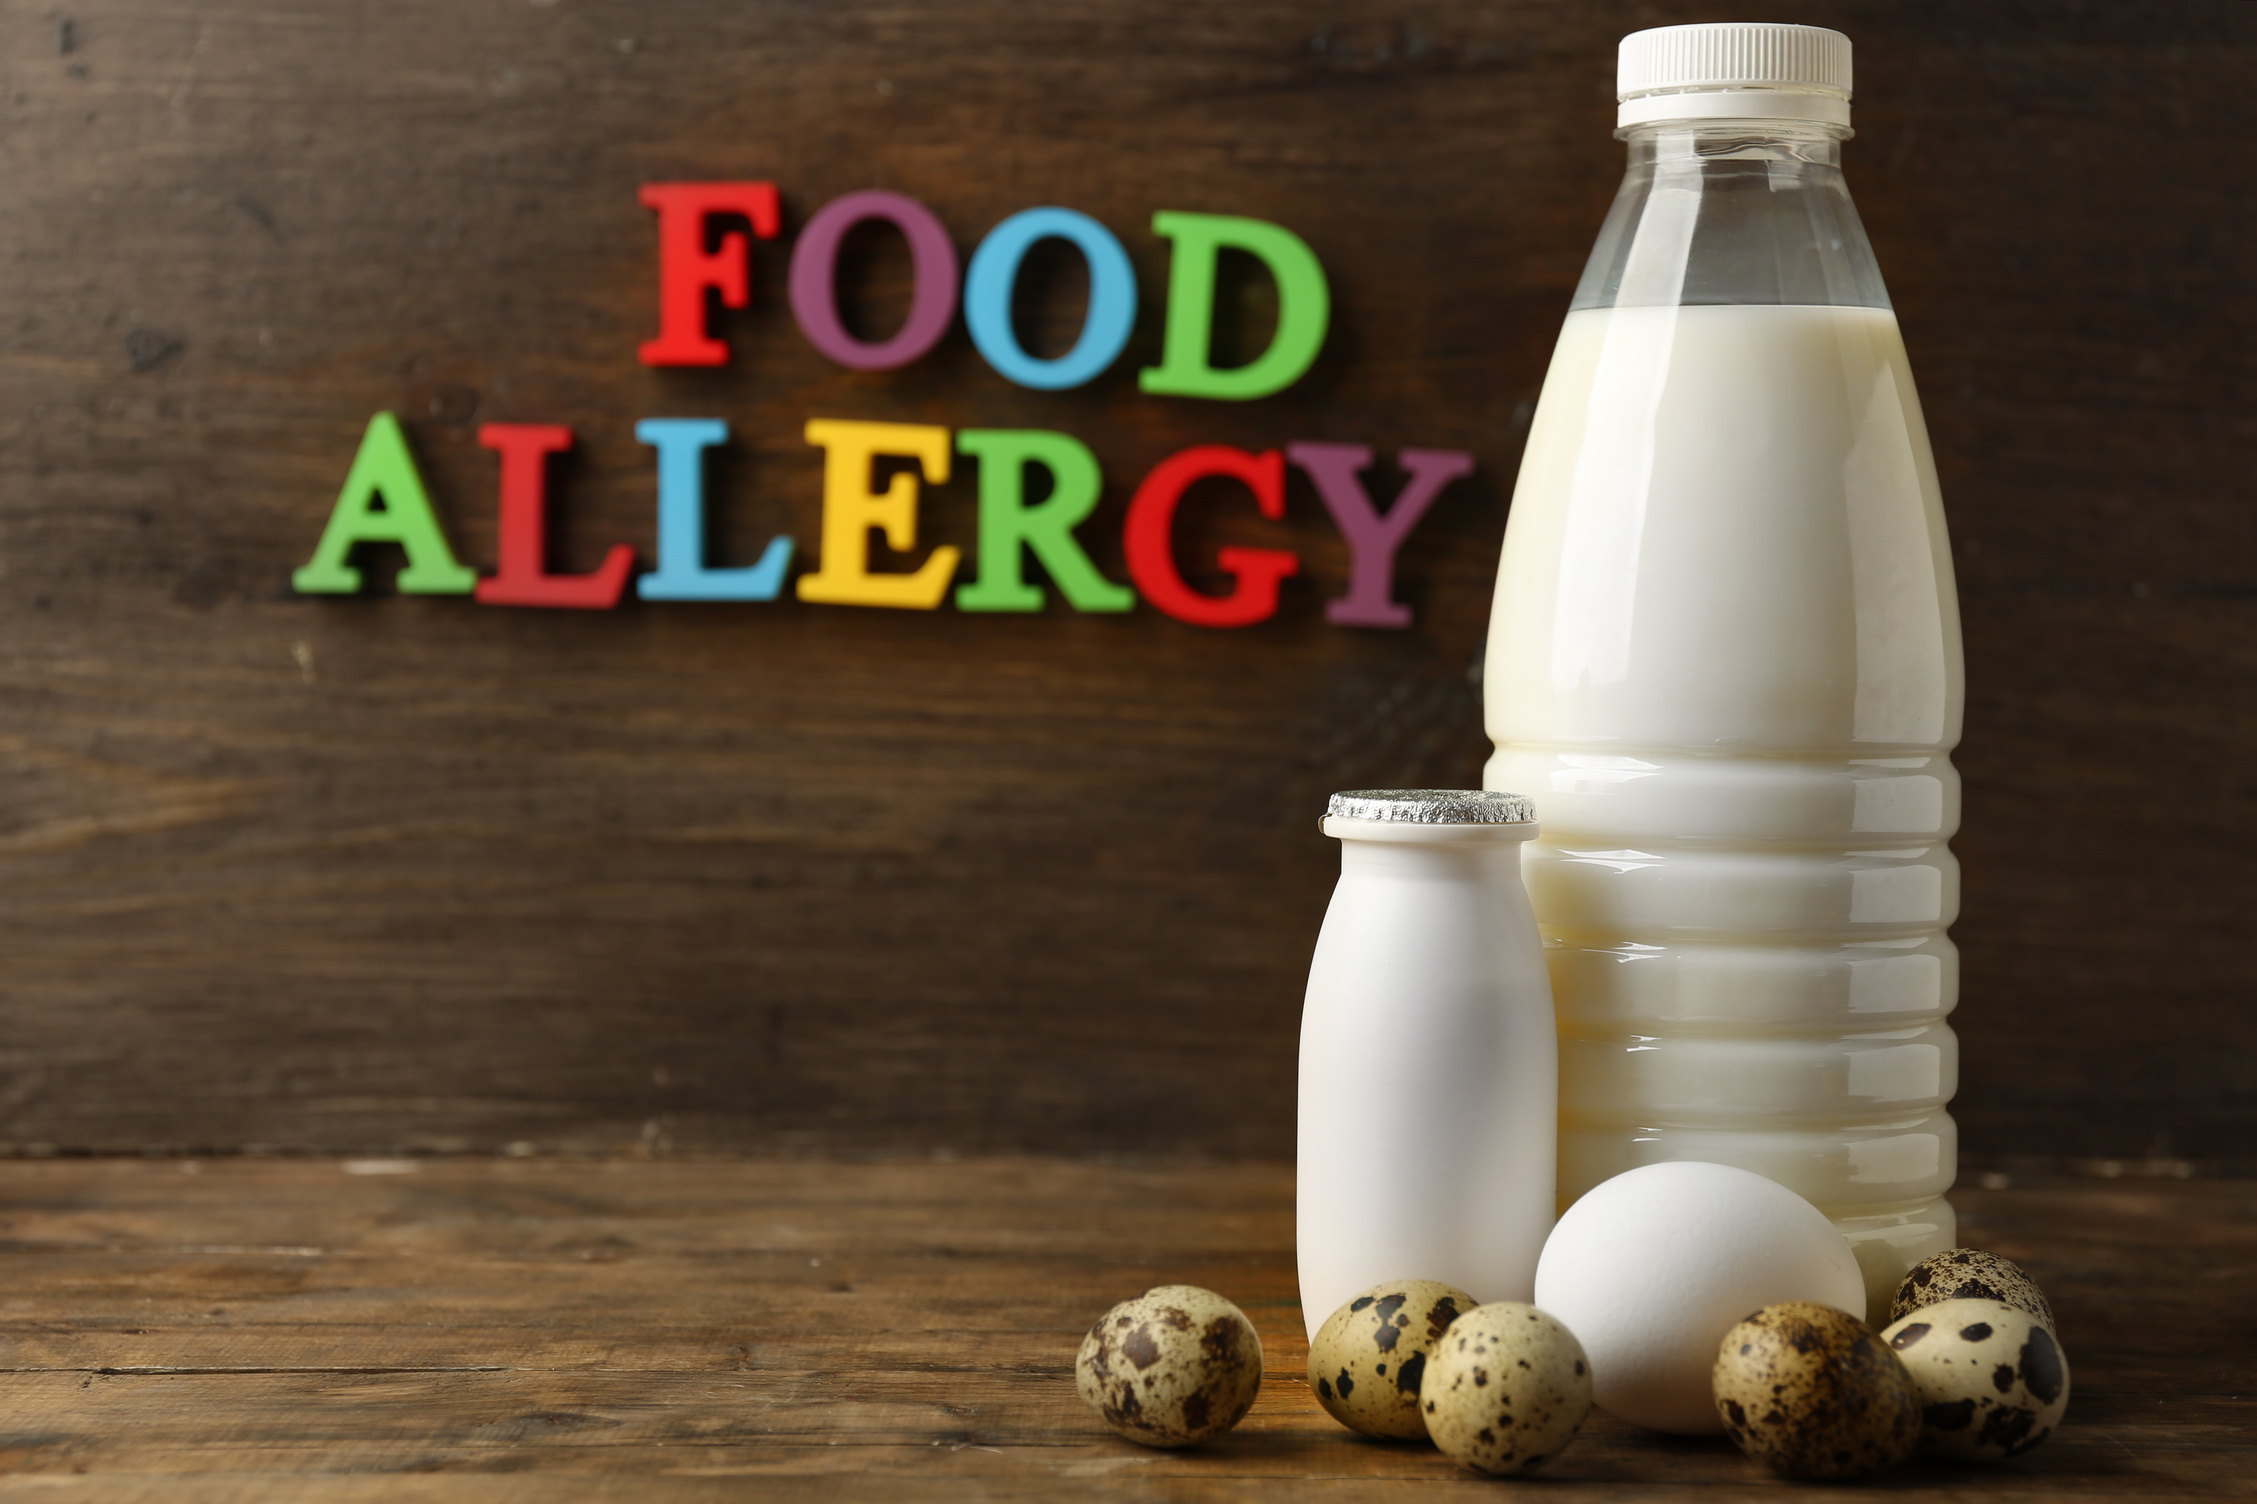 Selection of Food Allergens